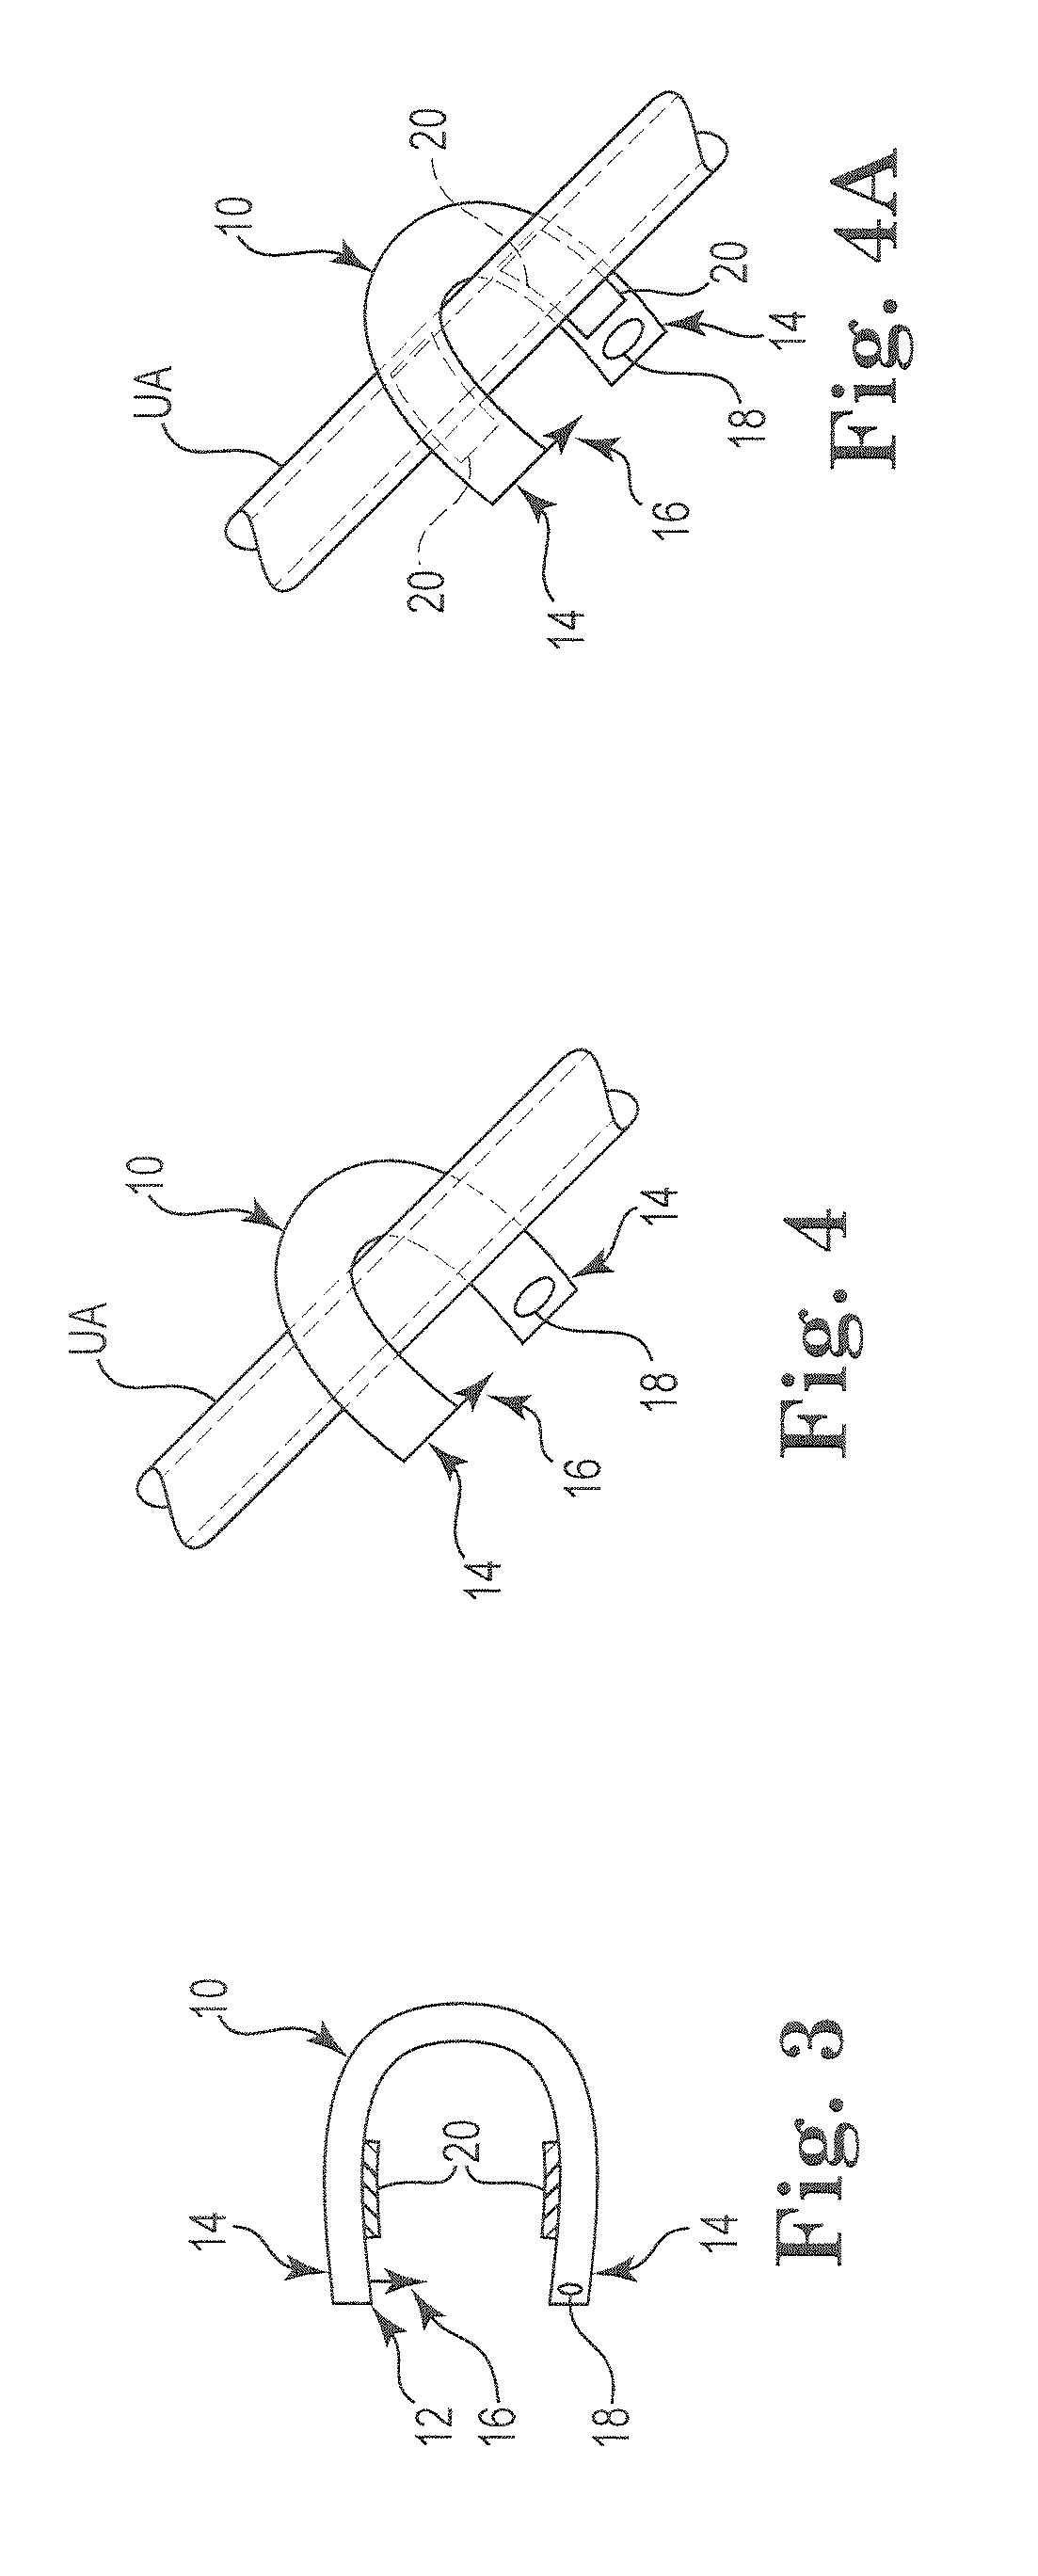 Fibroid Treatment System and Method